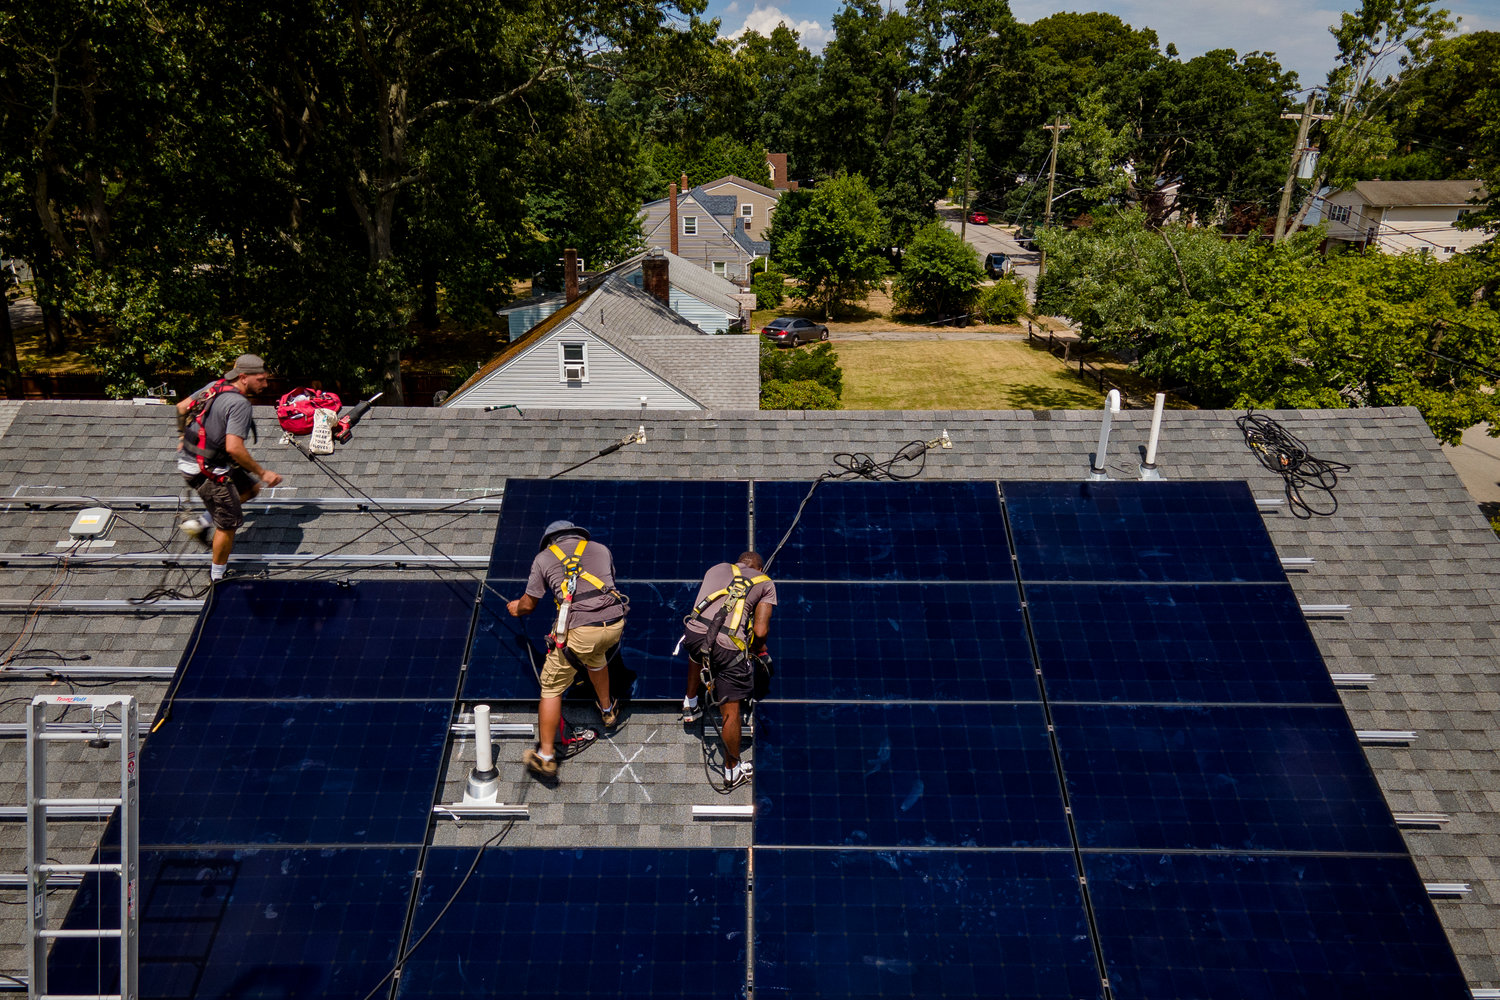 Employees of NY State Solar, a residential and commercial photovoltaic systems company, install an array of solar panels on a roof, Thursday, Aug. 11, 2022, in the Long Island hamlet of Massapequa, N.Y.  Americans are less concerned now about how climate change might impact them personally — and about how their personal choices affect the climate than they were three years ago, according to a according to a June poll from The Associated Press-NORC Center for Public Affairs Research.